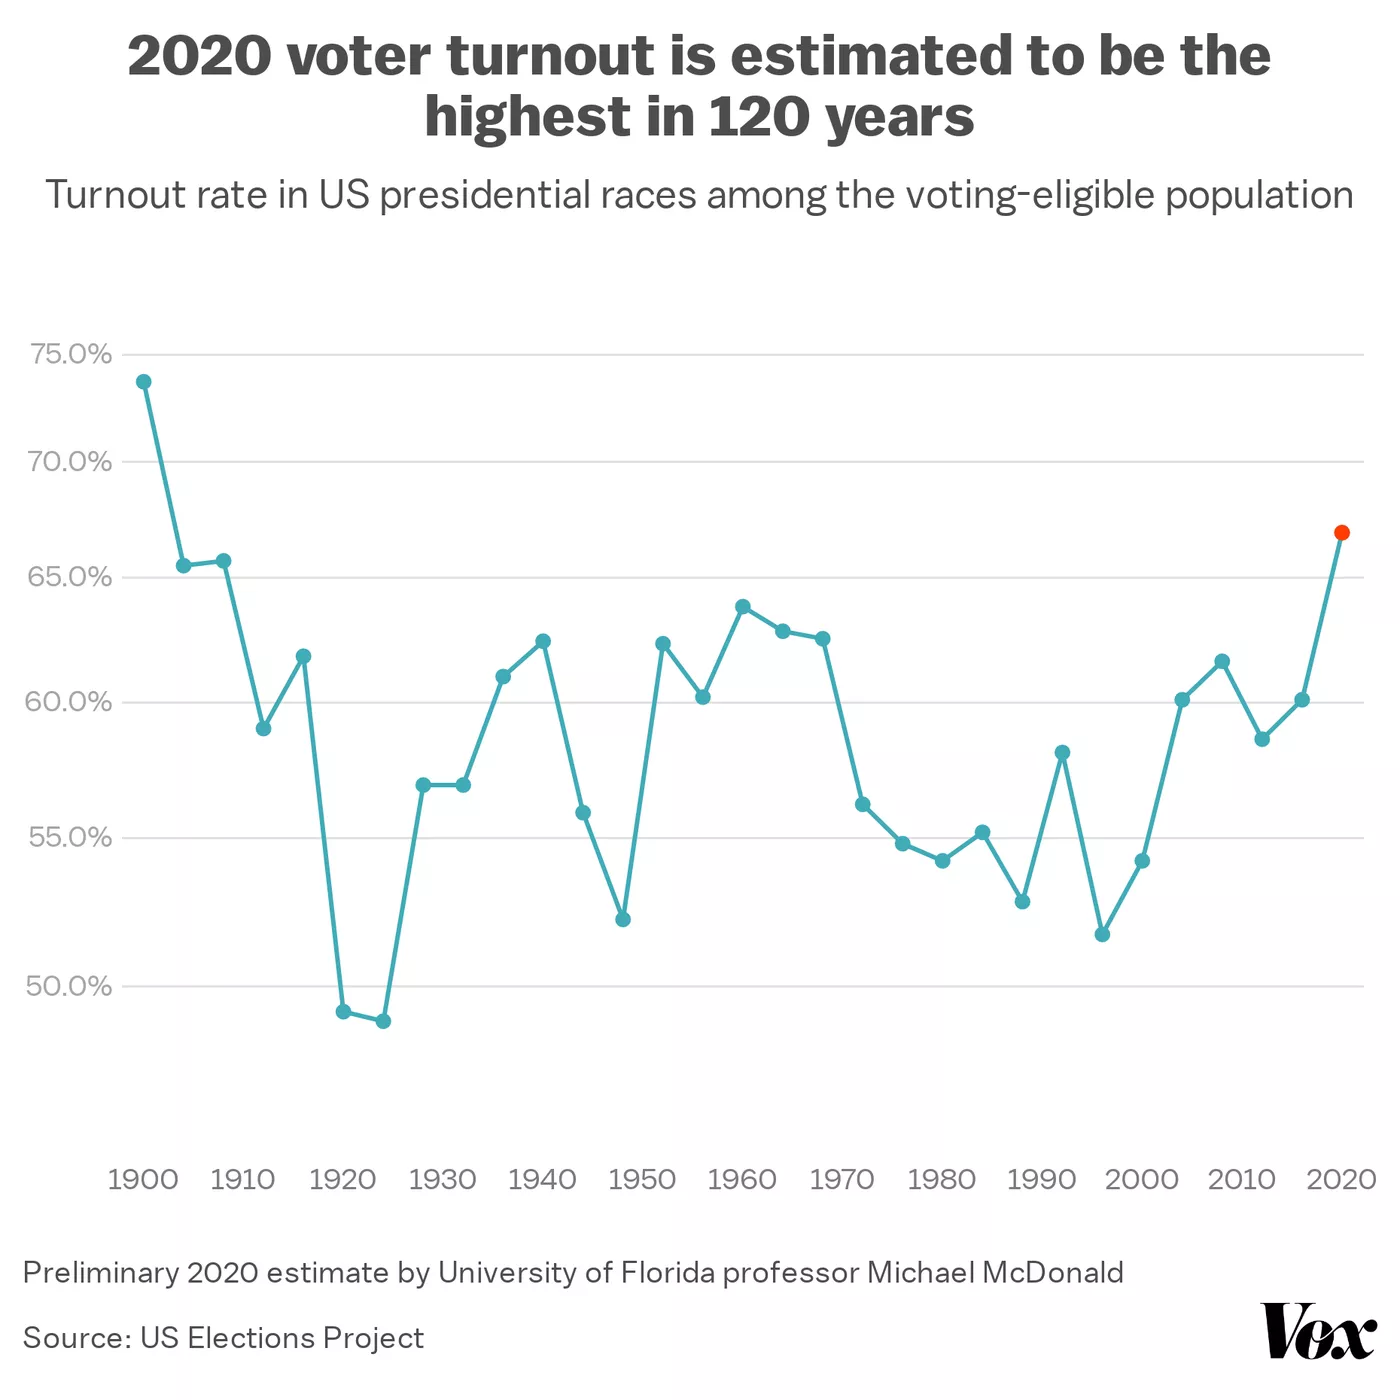  An Unexpected Voter Turnout in an Unparalleled Year 